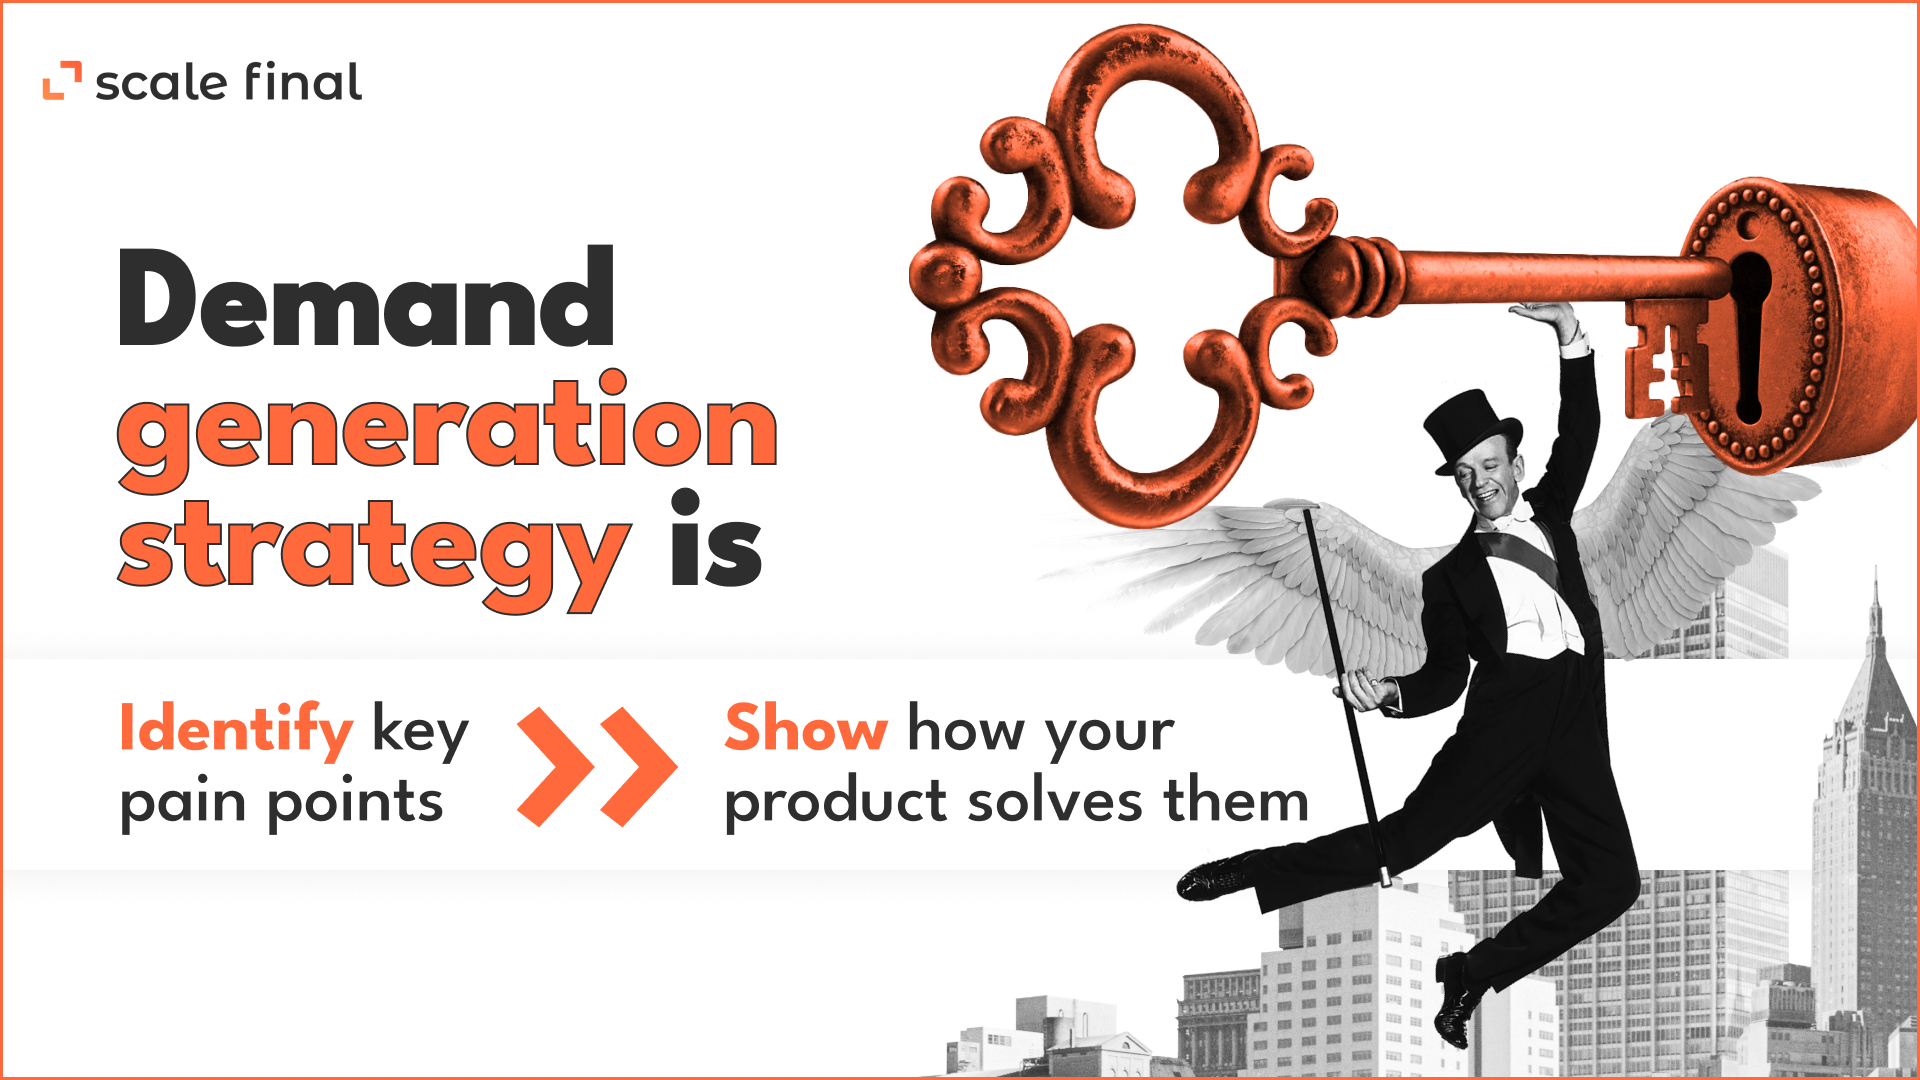 Demand generation strategy isIdentify key pain points - > Show how your product solves them